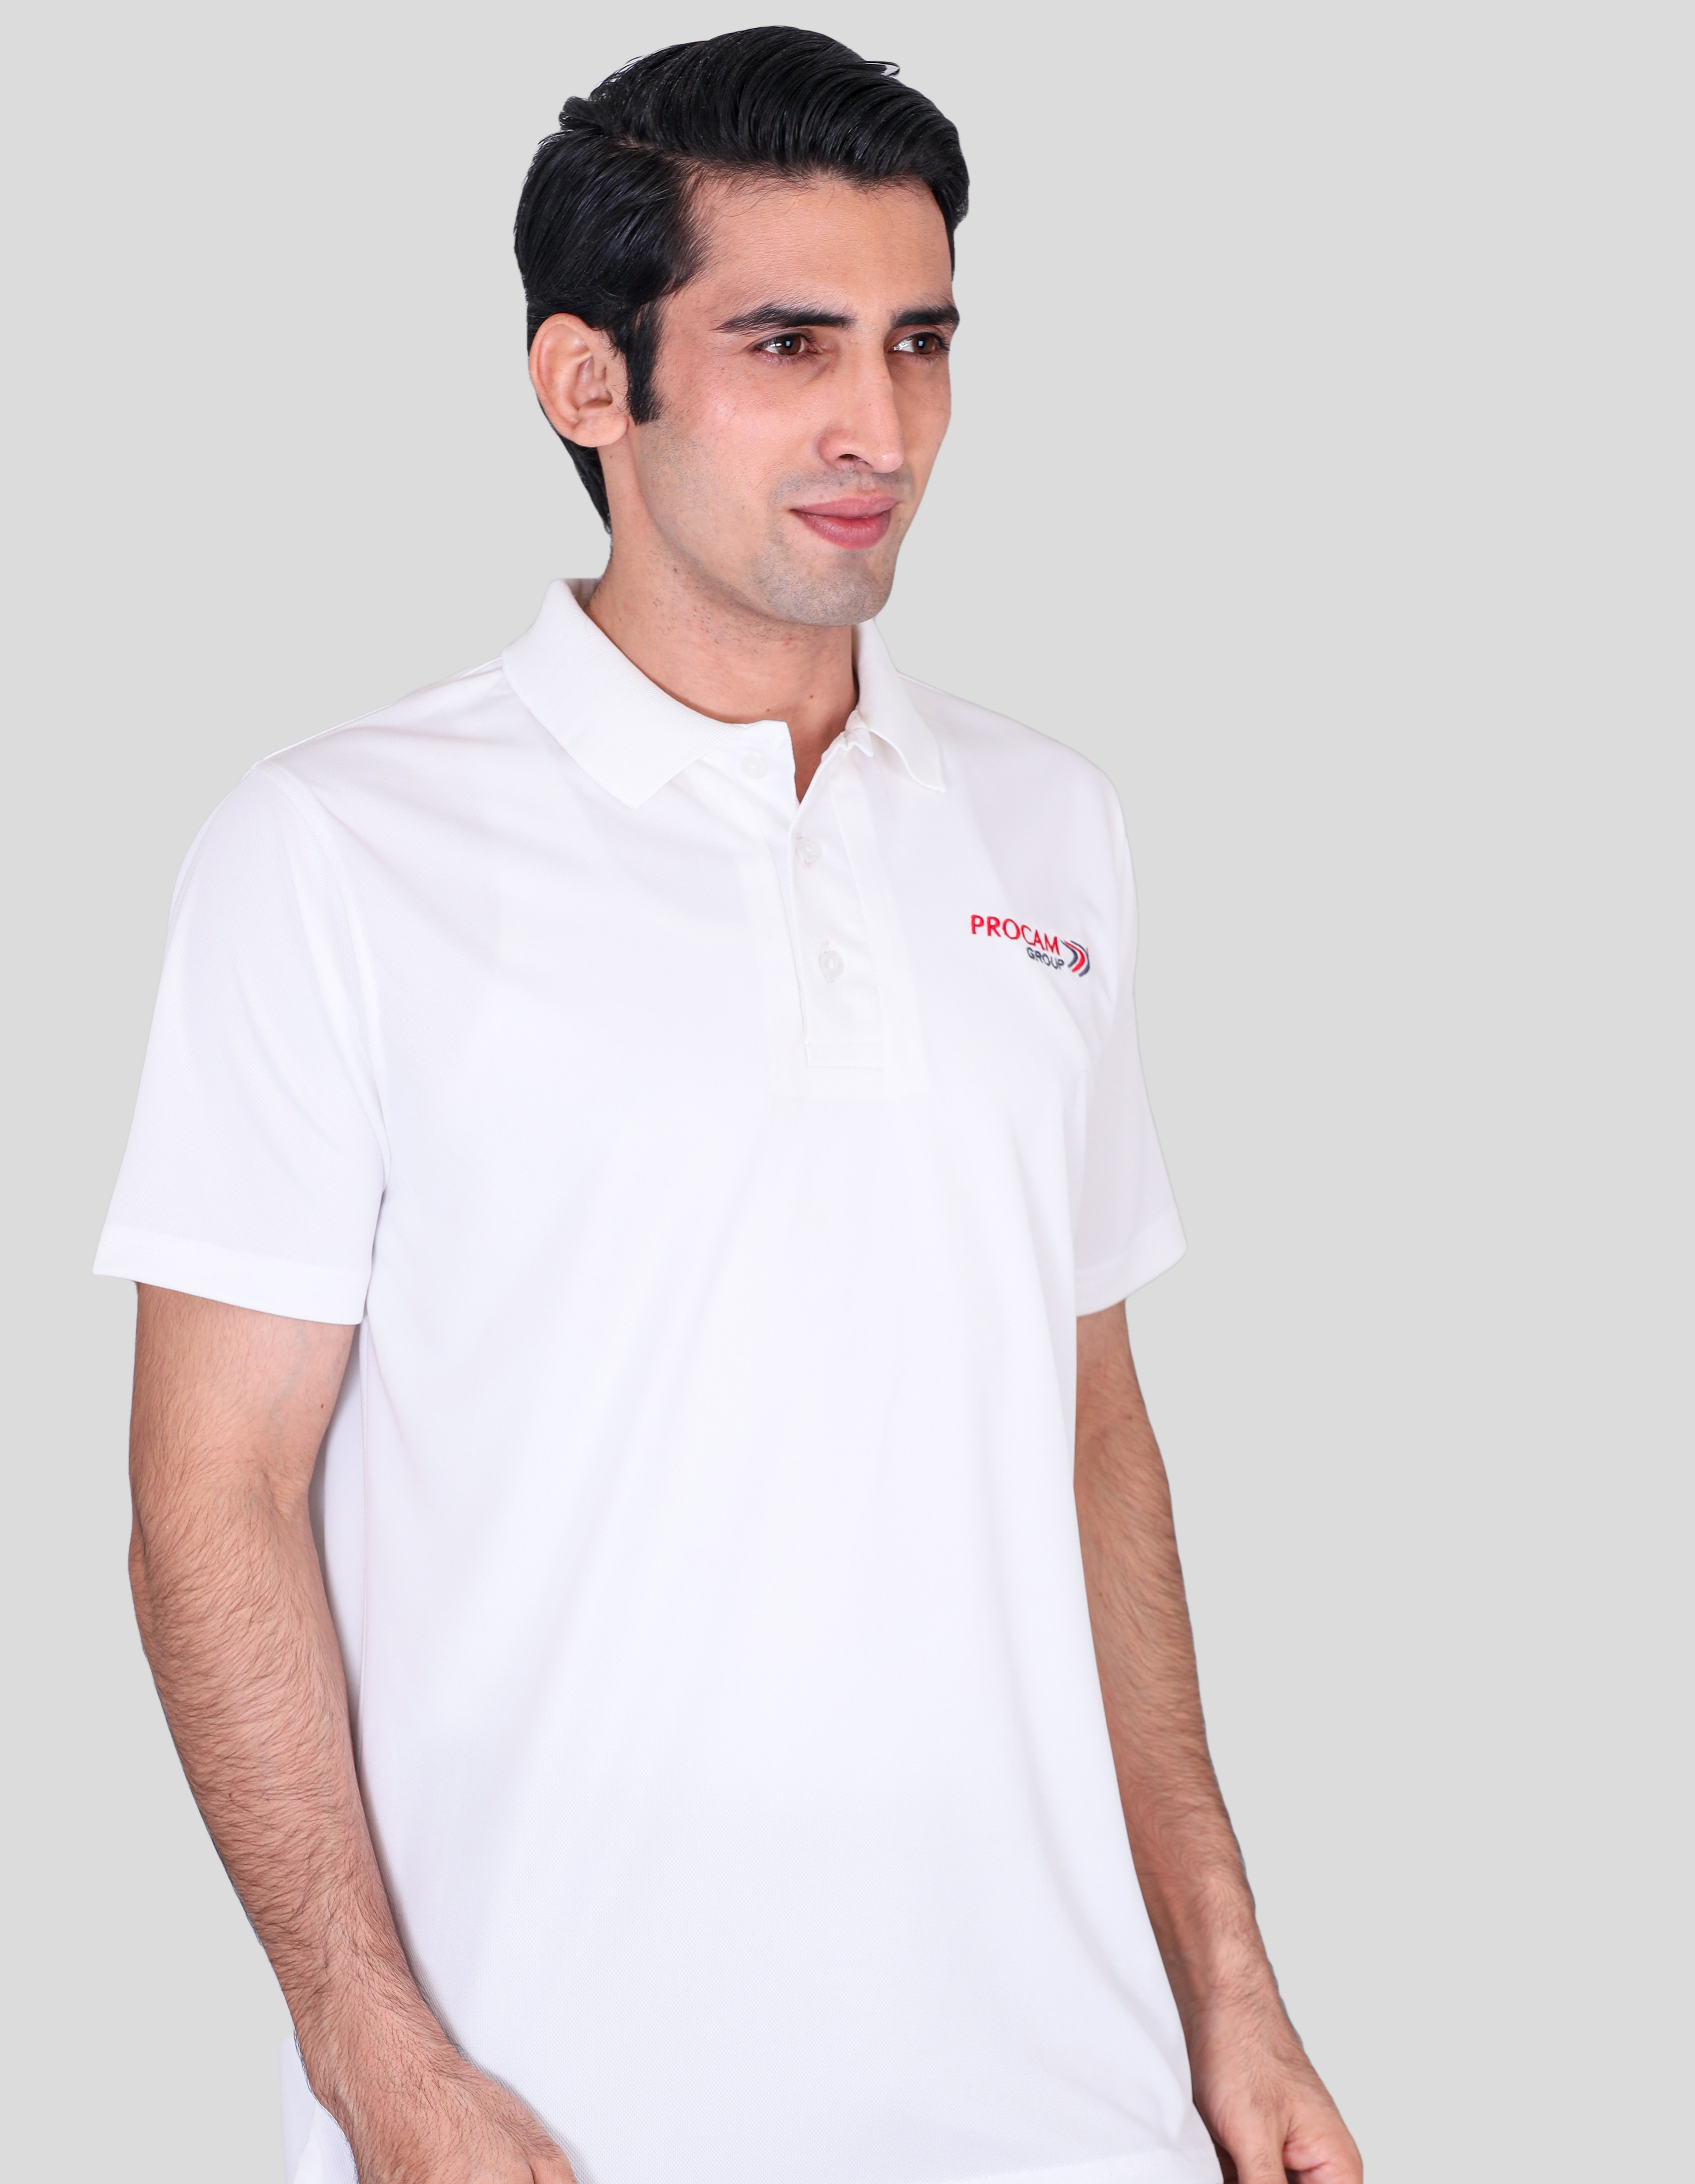 Procam white promotional polo t-shirts supplier 